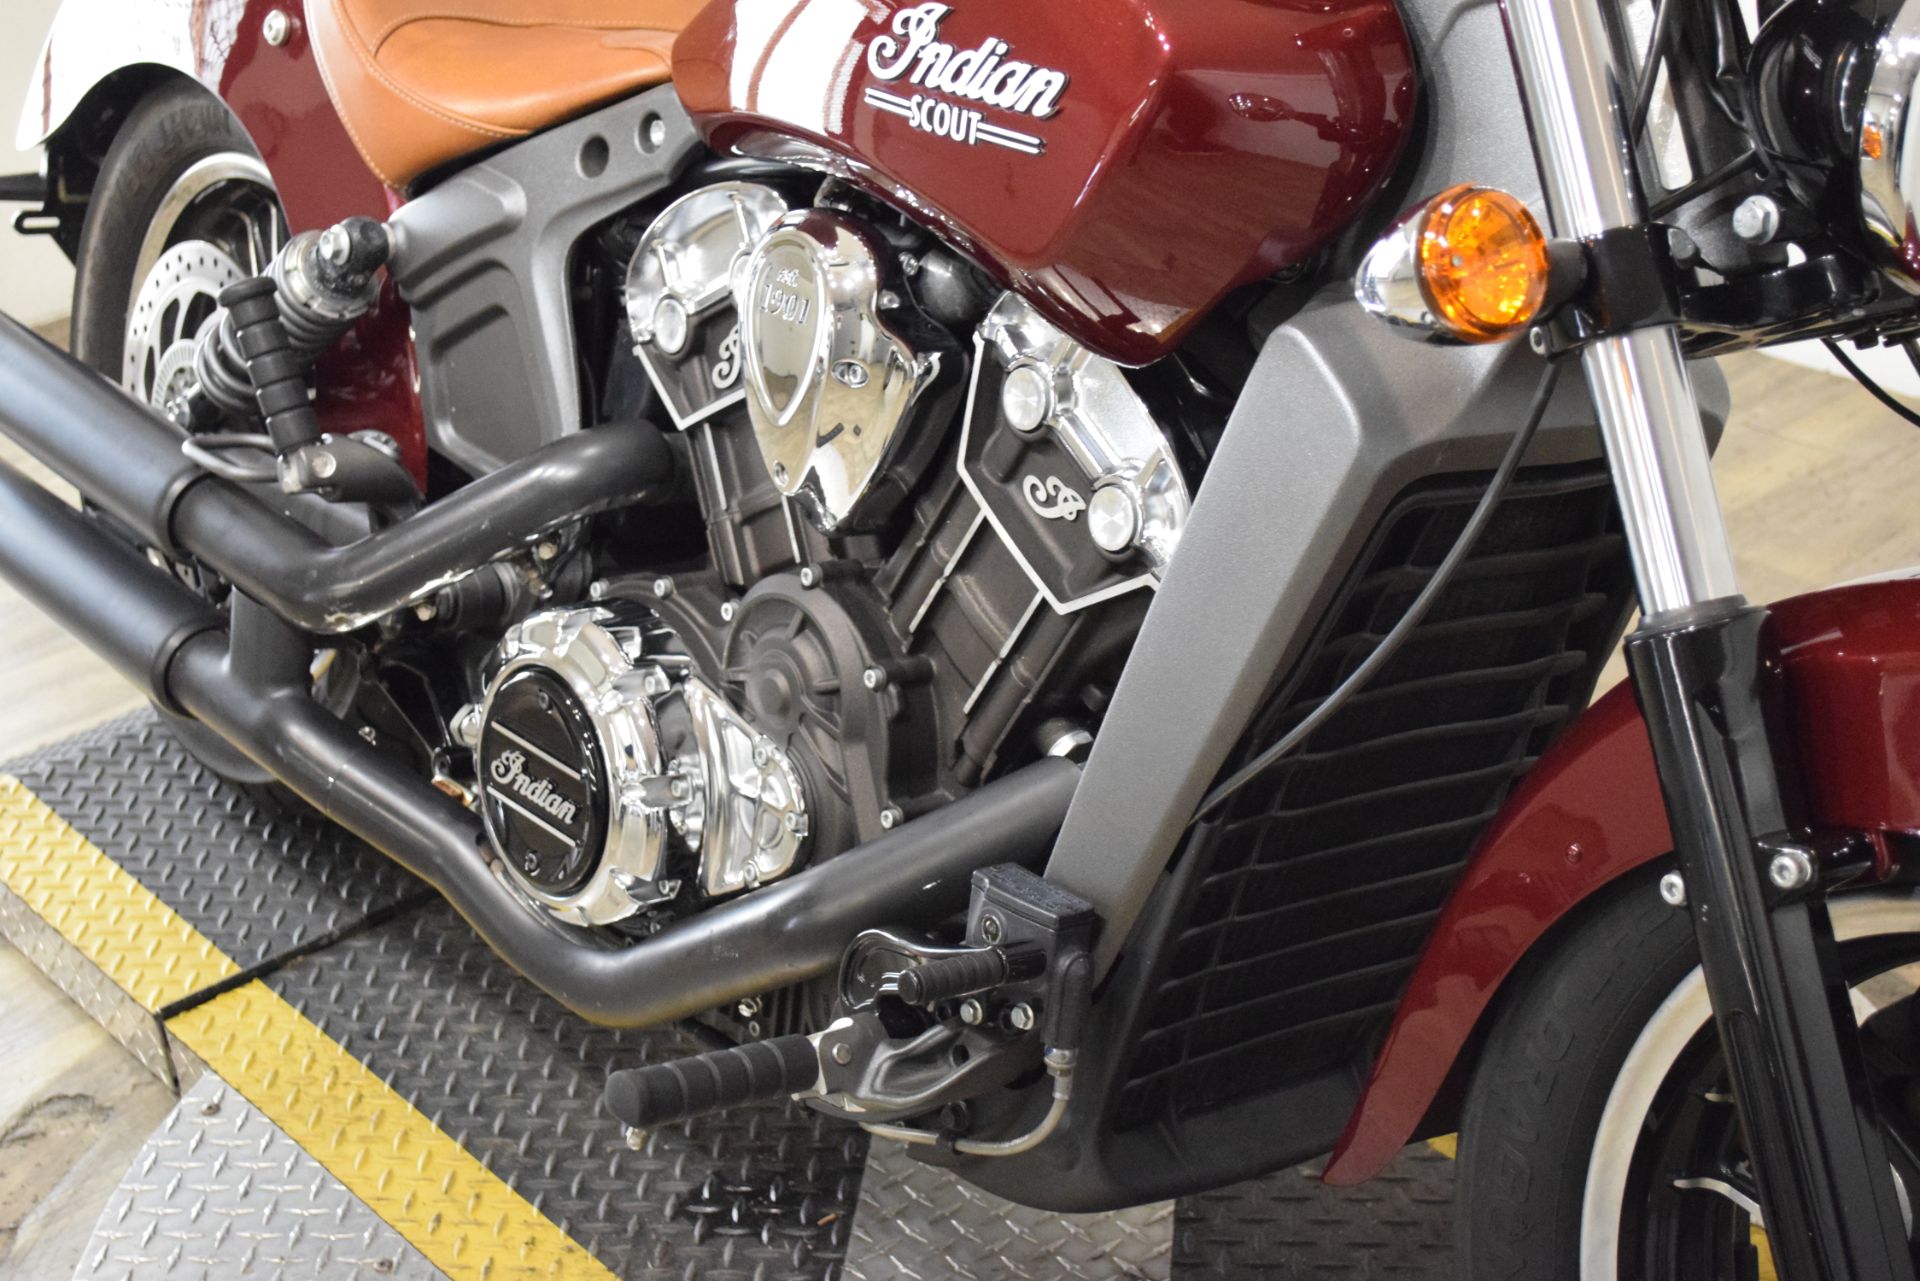 2018 Indian Motorcycle Scout® ABS in Wauconda, Illinois - Photo 4